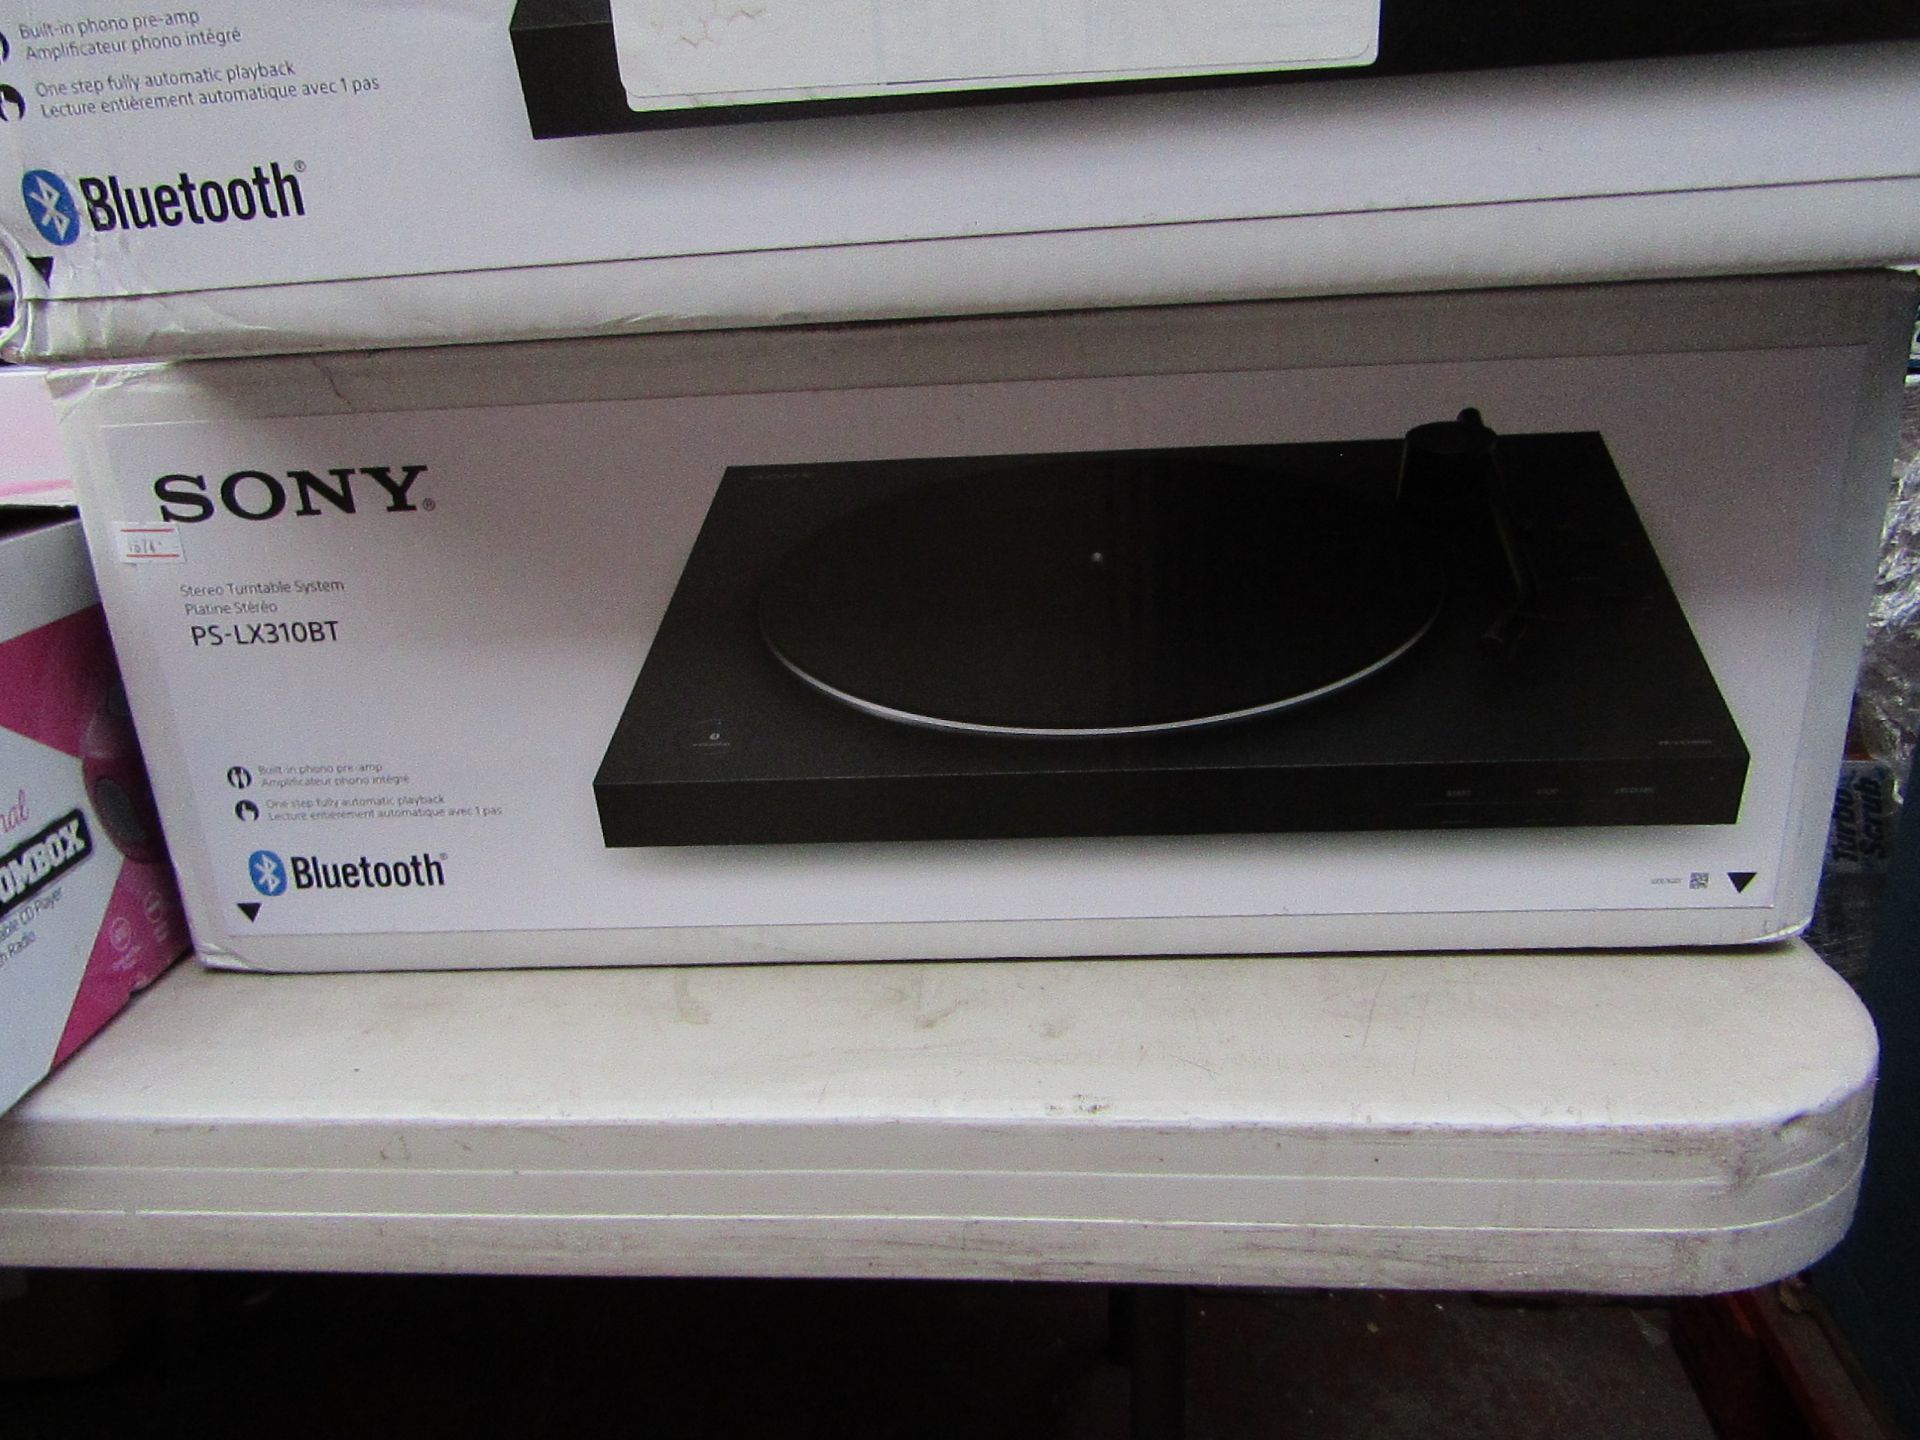 Sony PS-LX310BT stereo turntable, unchecked and boxed.